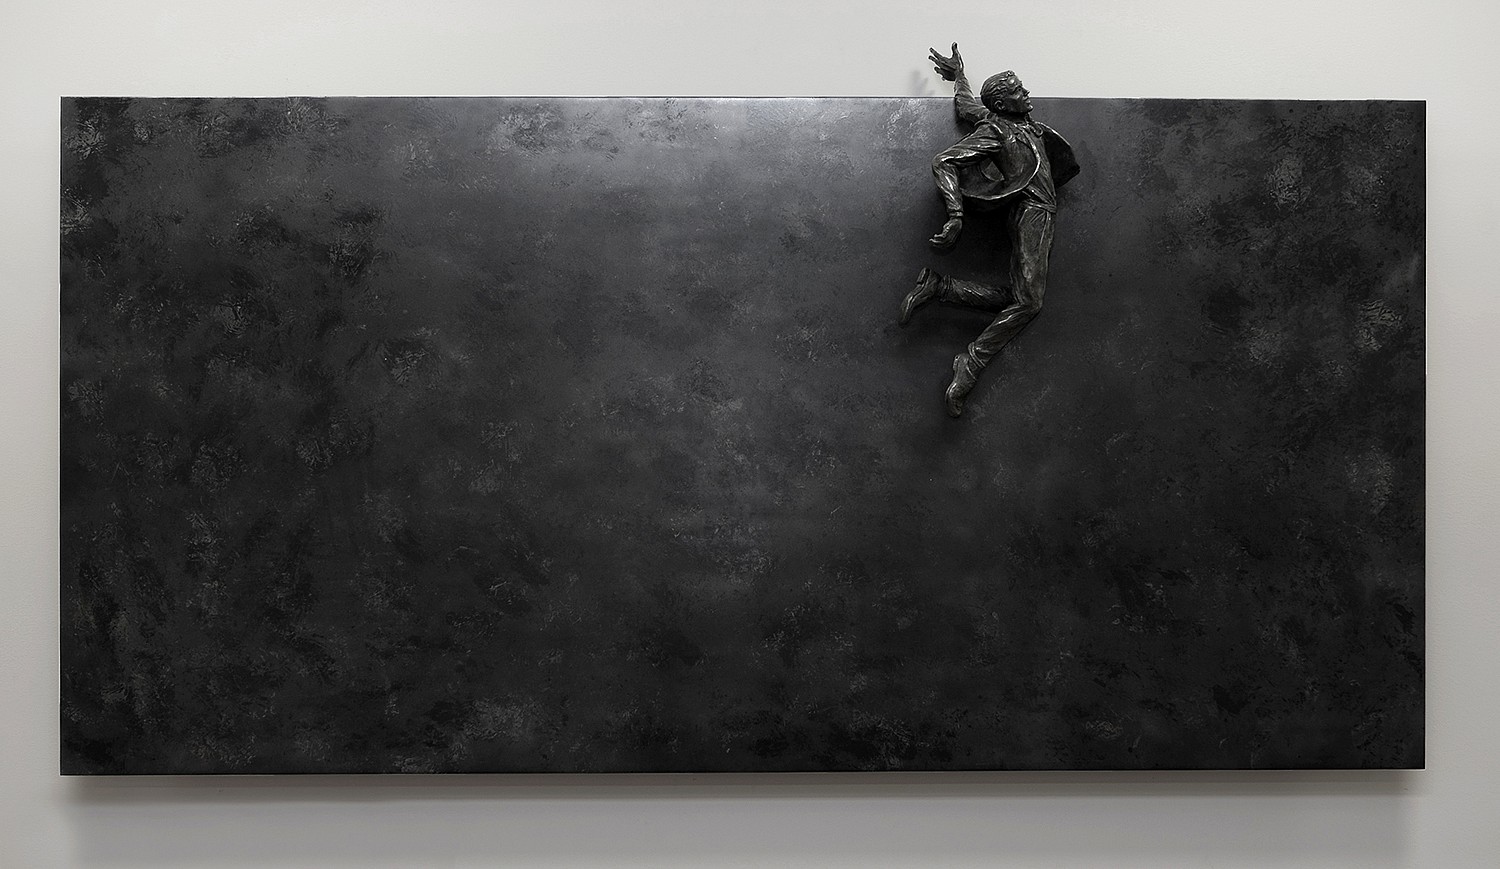 Jim Rennert, Leap of Faith, Edition of 9, 2009
bronze and steel, 38 x 60 x 15 in. (96.5 x 152.4 x 38.1 cm)
JR020709